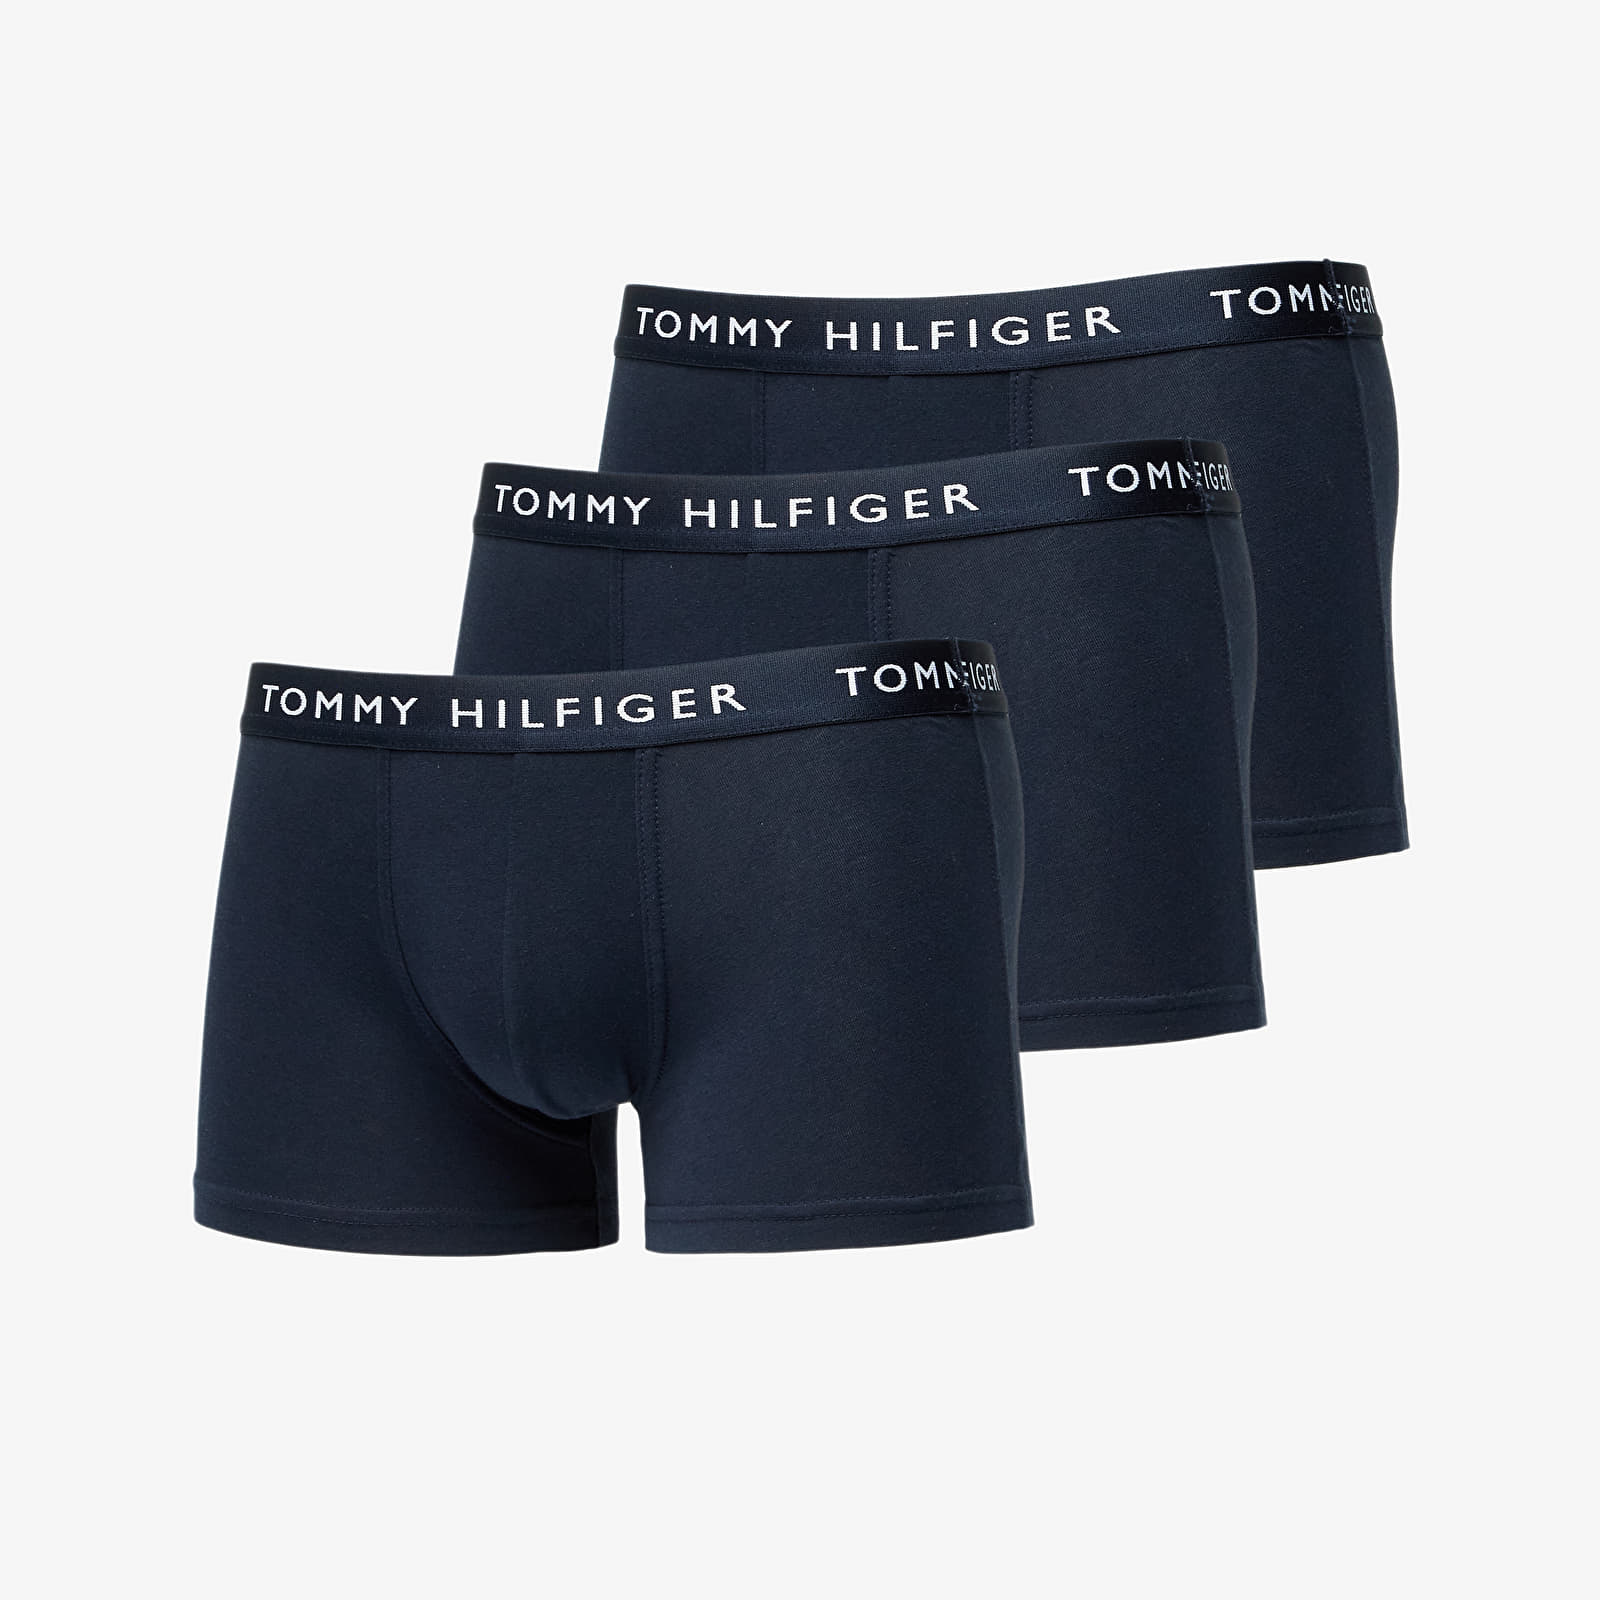 Boxer shorts Tommy Hilfiger Recycled Essentials 3-Pack Trunk Desert Sky/ Desert Sky/ Desert Sky